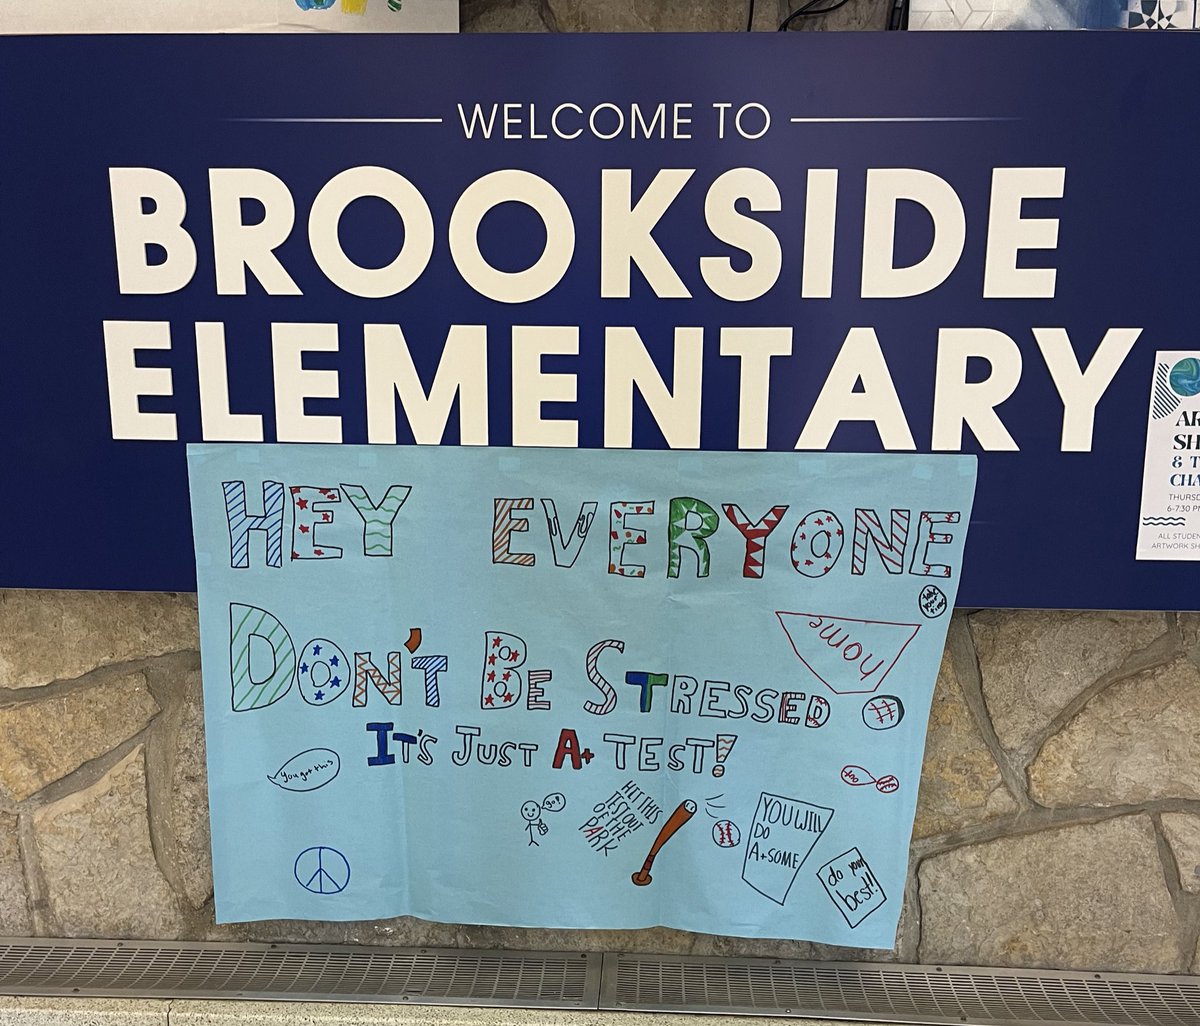 Tomorrow OSTs start at @BrooksideBcats1 and Student Council has a message for our 3rd-5th graders #itsWorthit